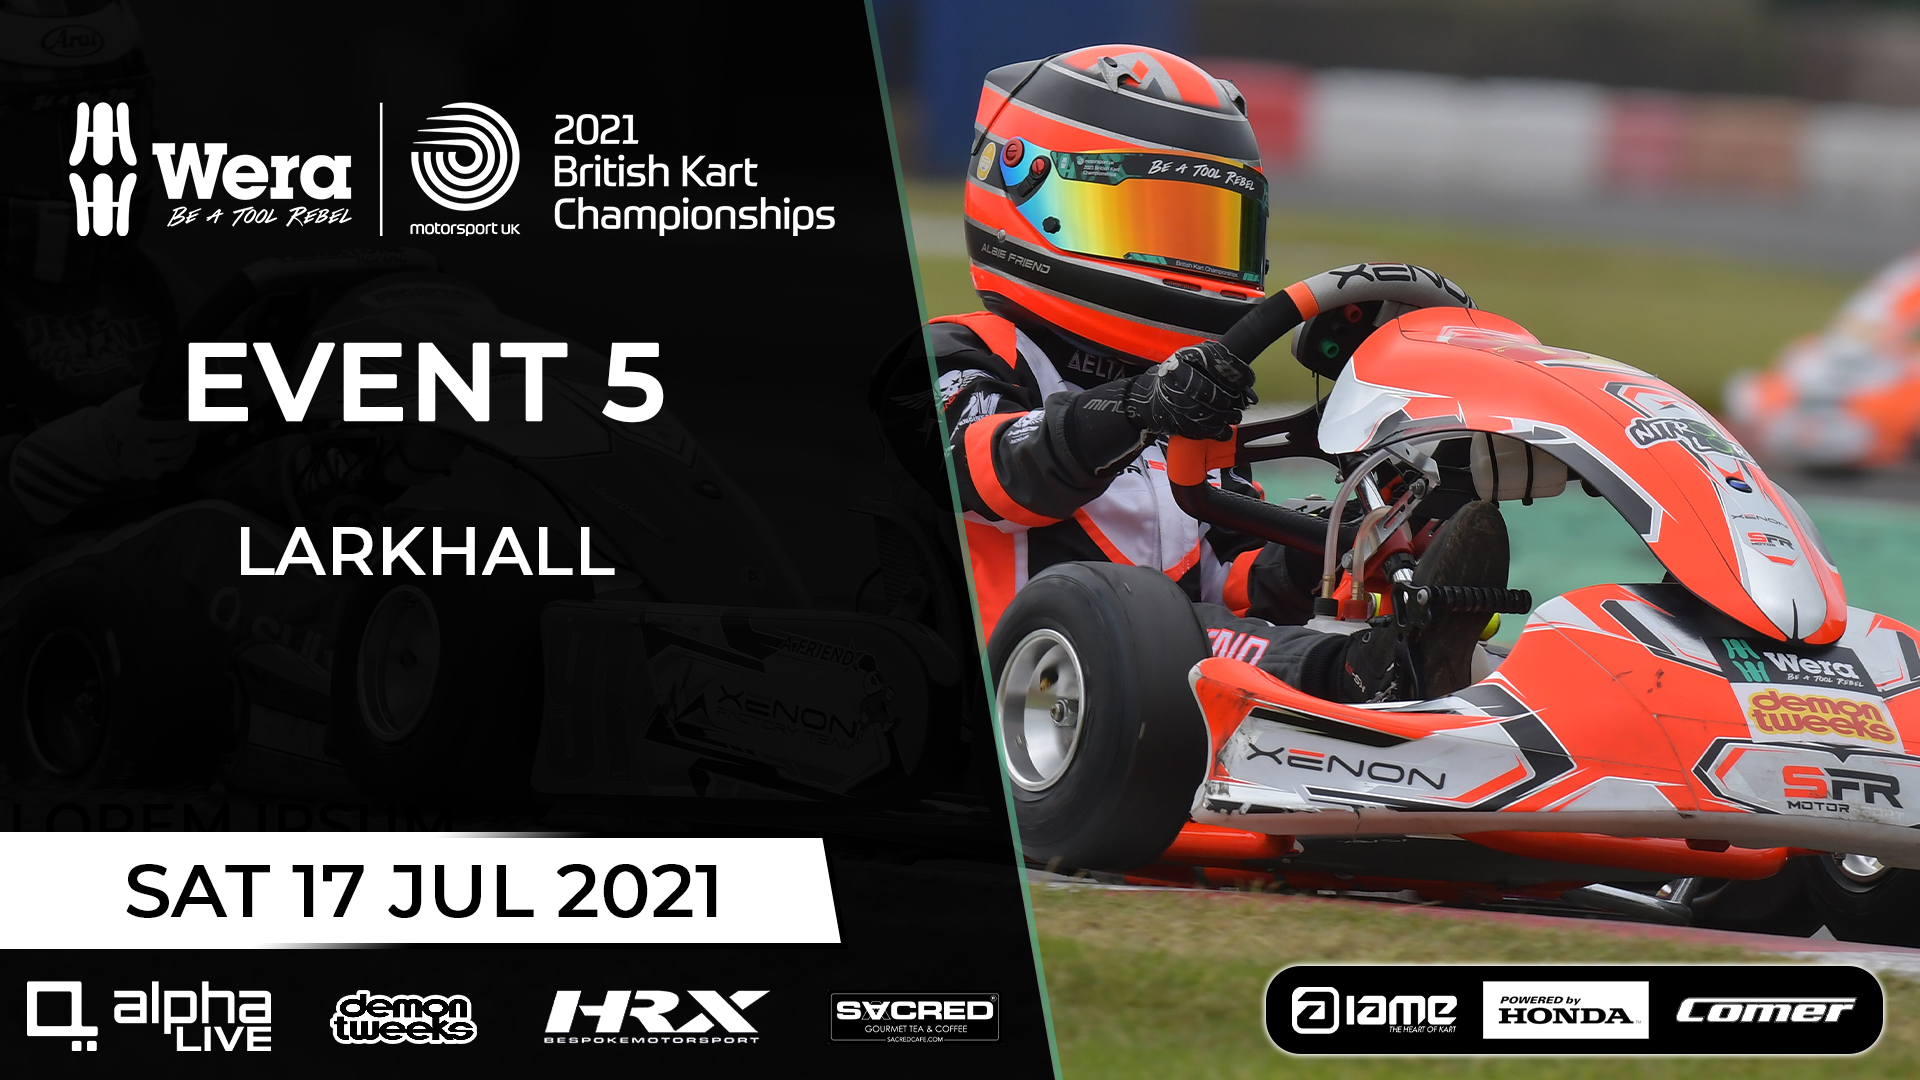 WATCH AGAIN: Event #5 from Larkhall (Saturday)